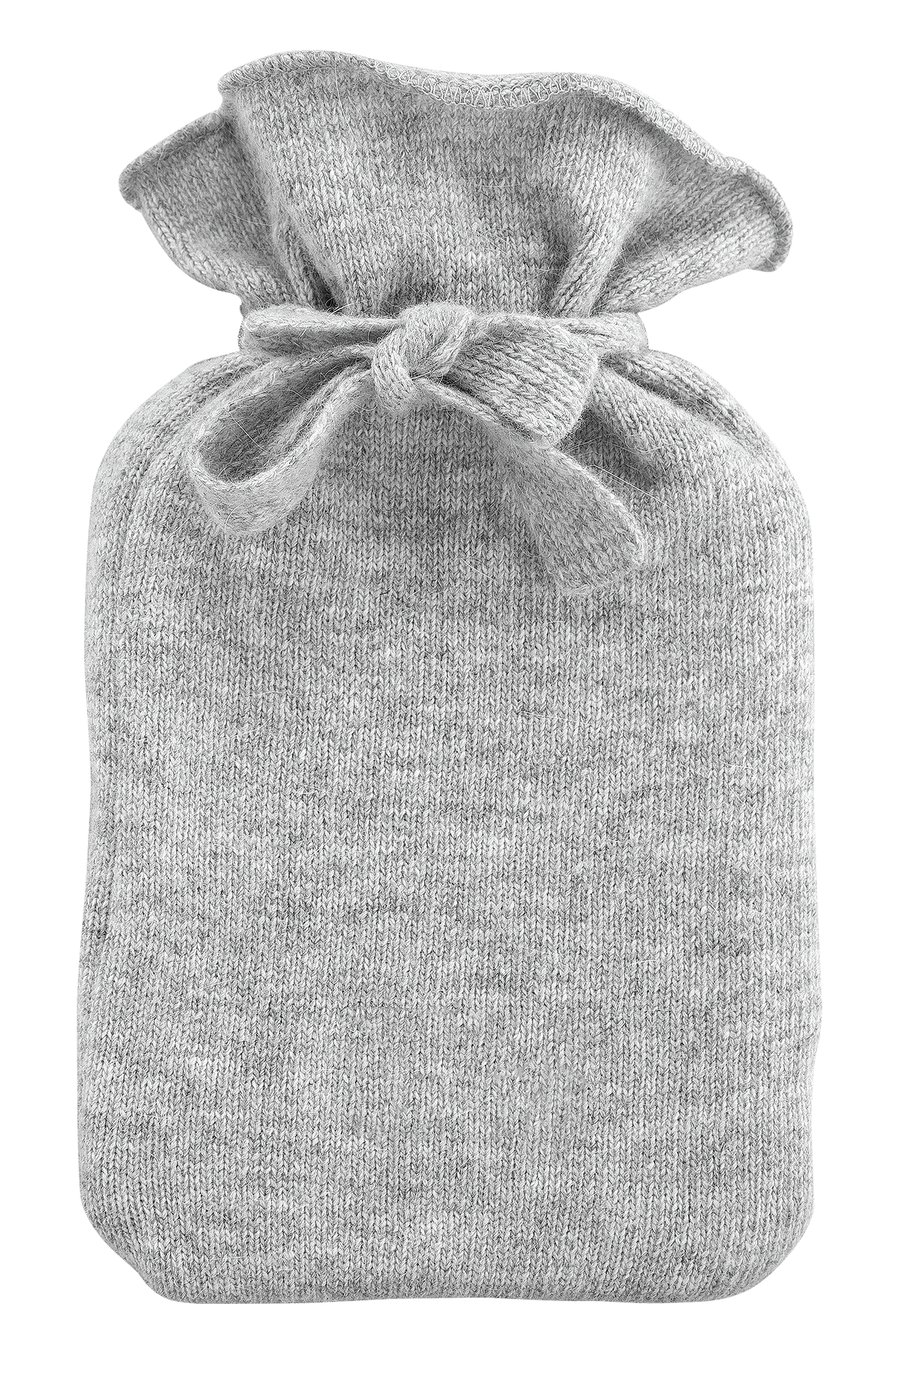 Tranquil Retreat Knitted Hot Water Bottle - Grey